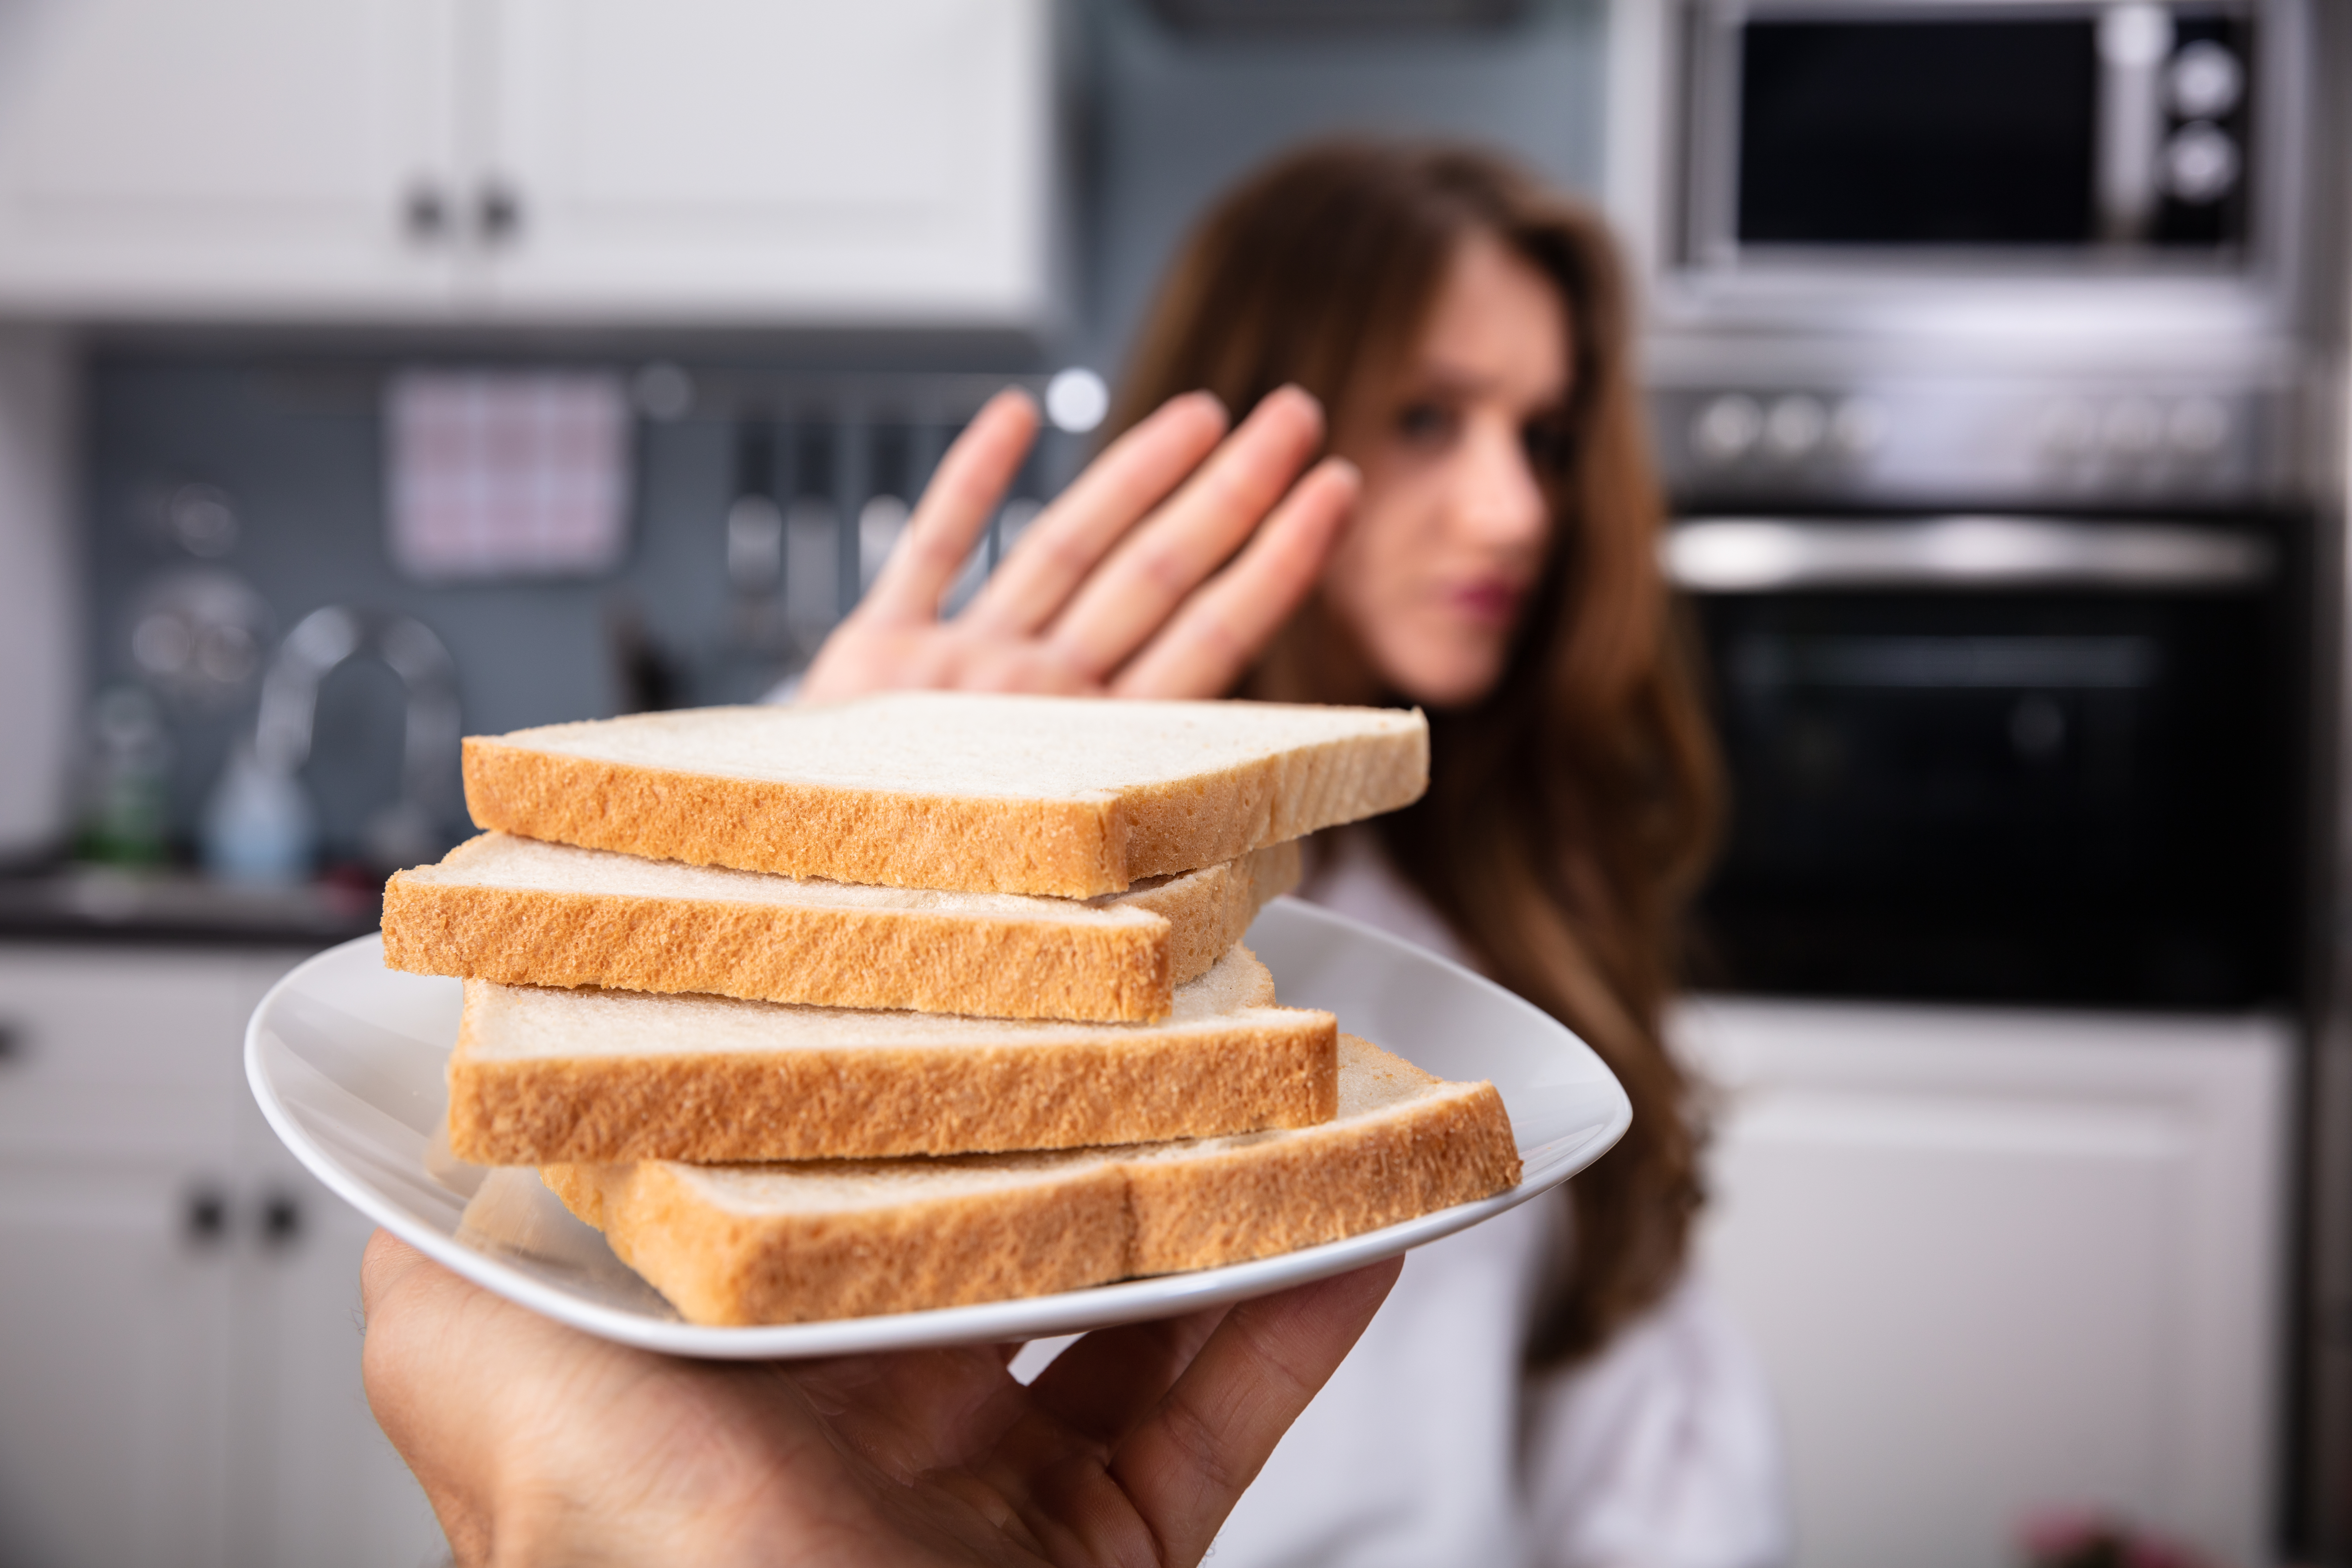 A woman refusing a plate of white bread | Source: Shutterstock